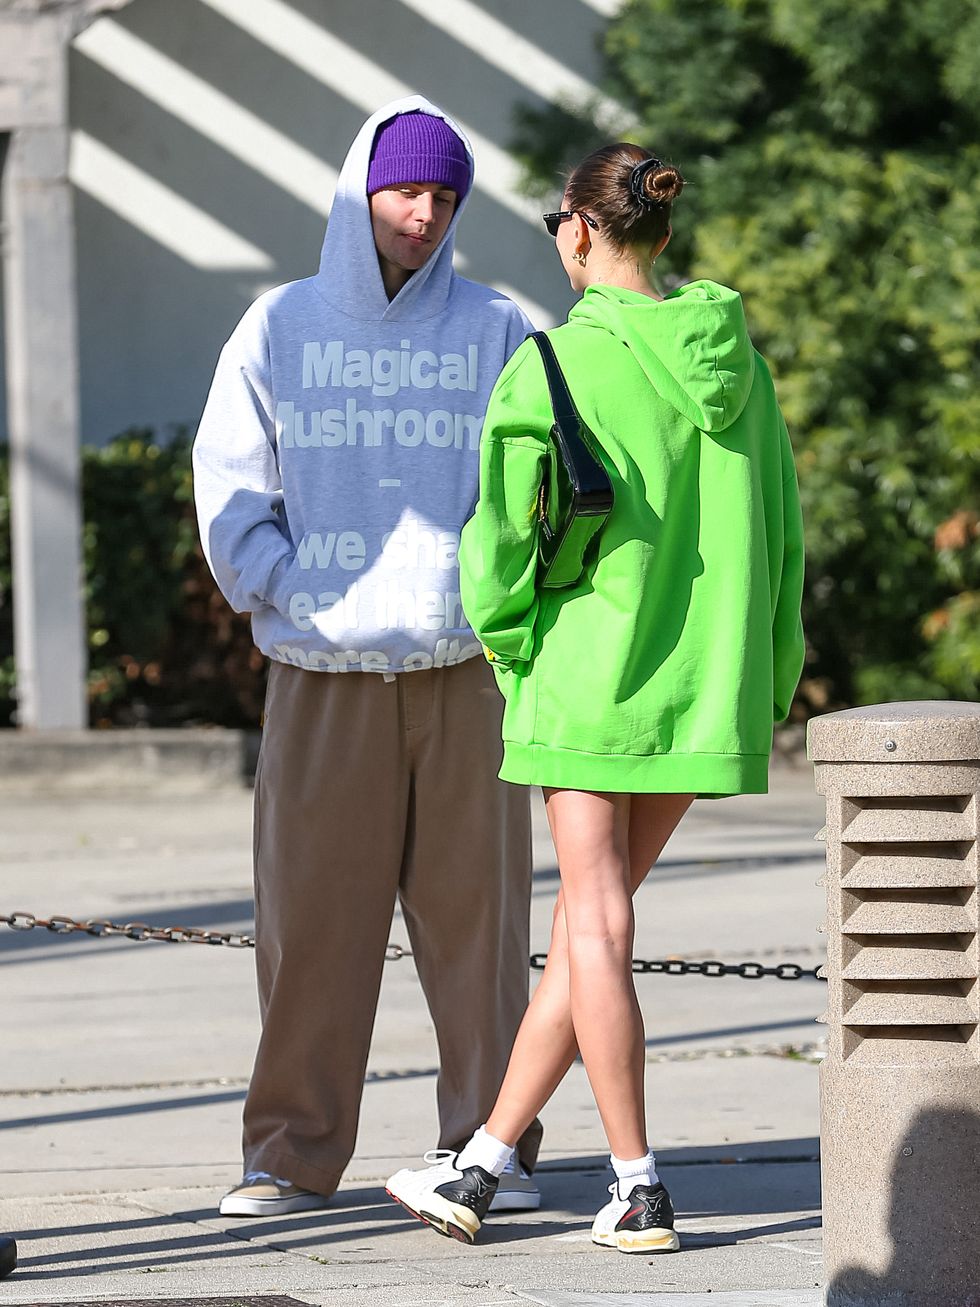 los angeles, ca january 19 justin bieber and hailey bieber are seen on january 19, 2023 in los angeles, california photo by bellocqimagesbauer griffingc images